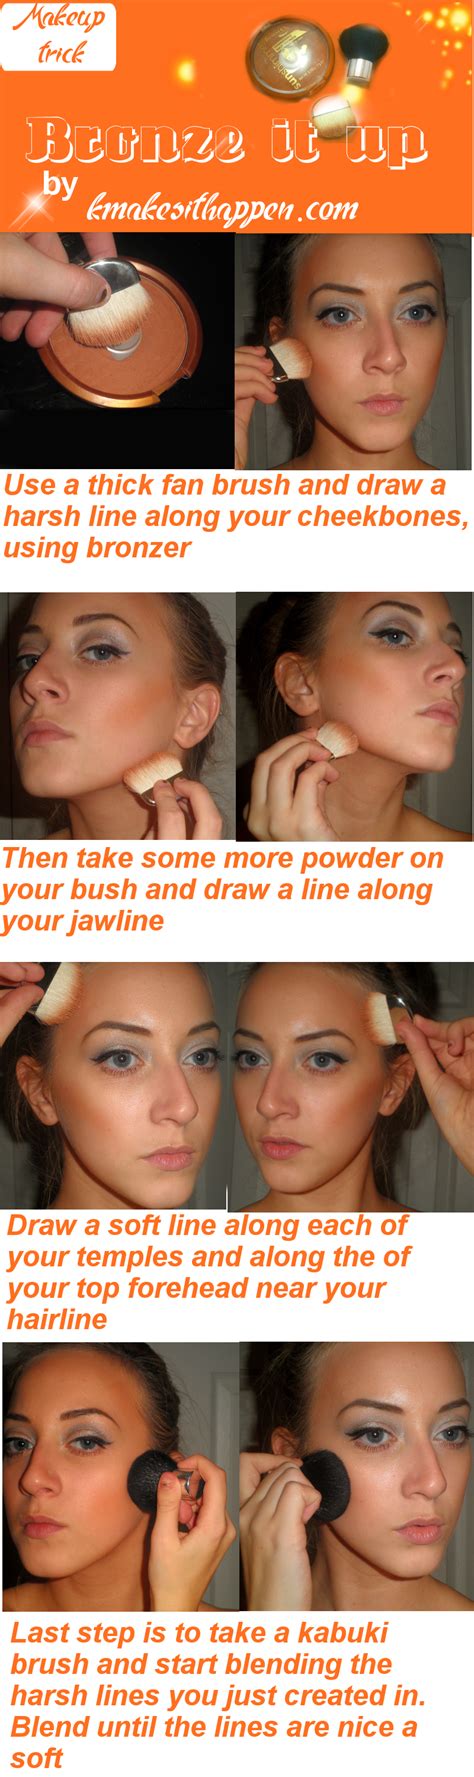 How To Use Bronzer Very Helpful For Someone Who Doesn T Know How To Use It Correctly With